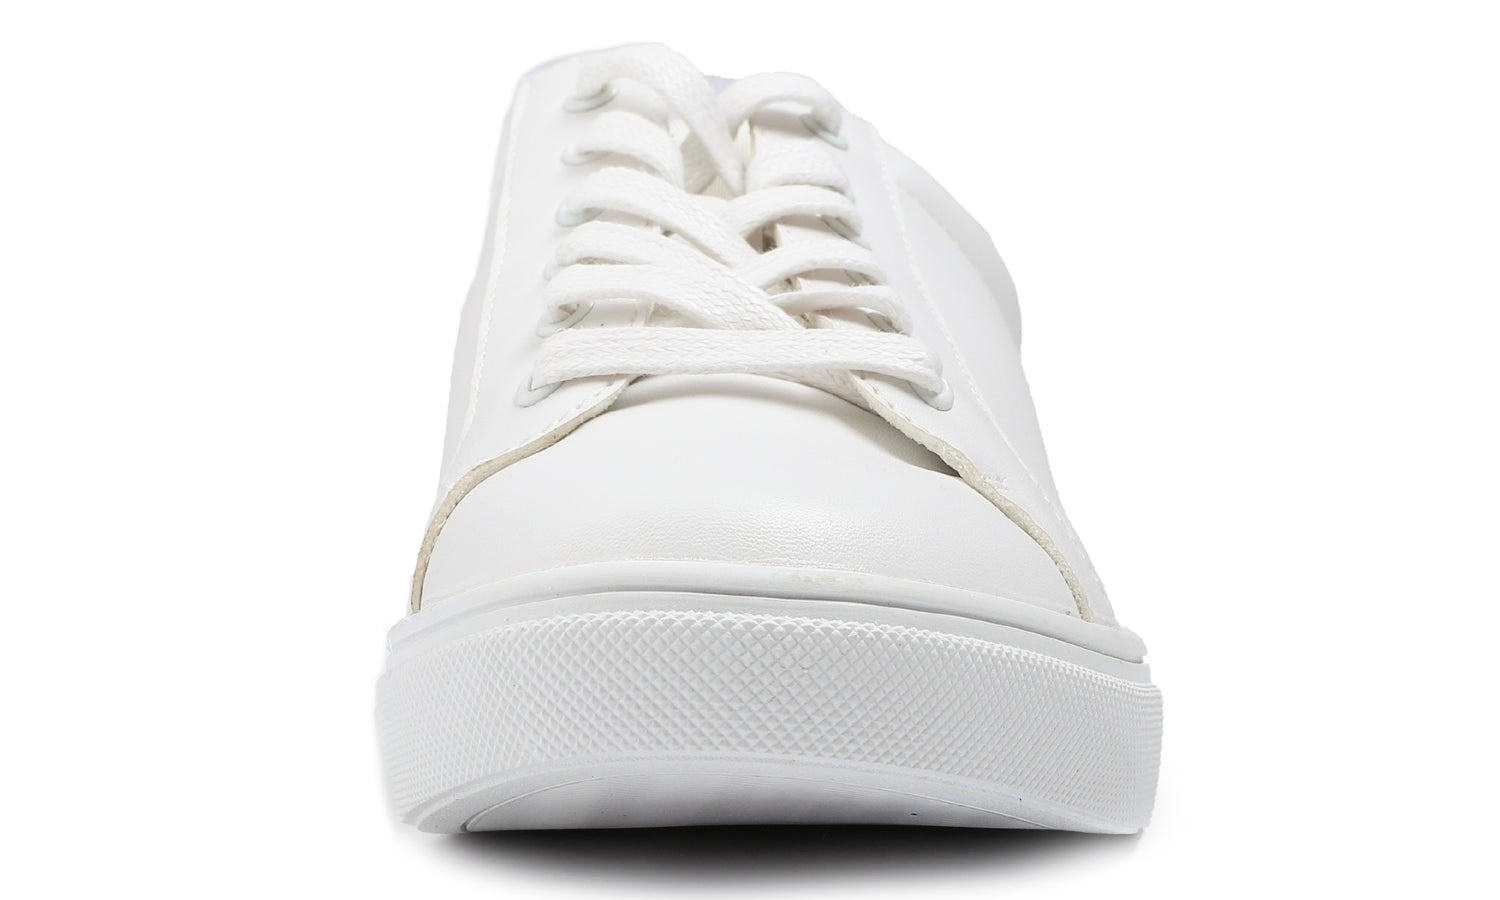 Feversole Women's Featured PU Leather White Rose Gold Lace Up Sneaker